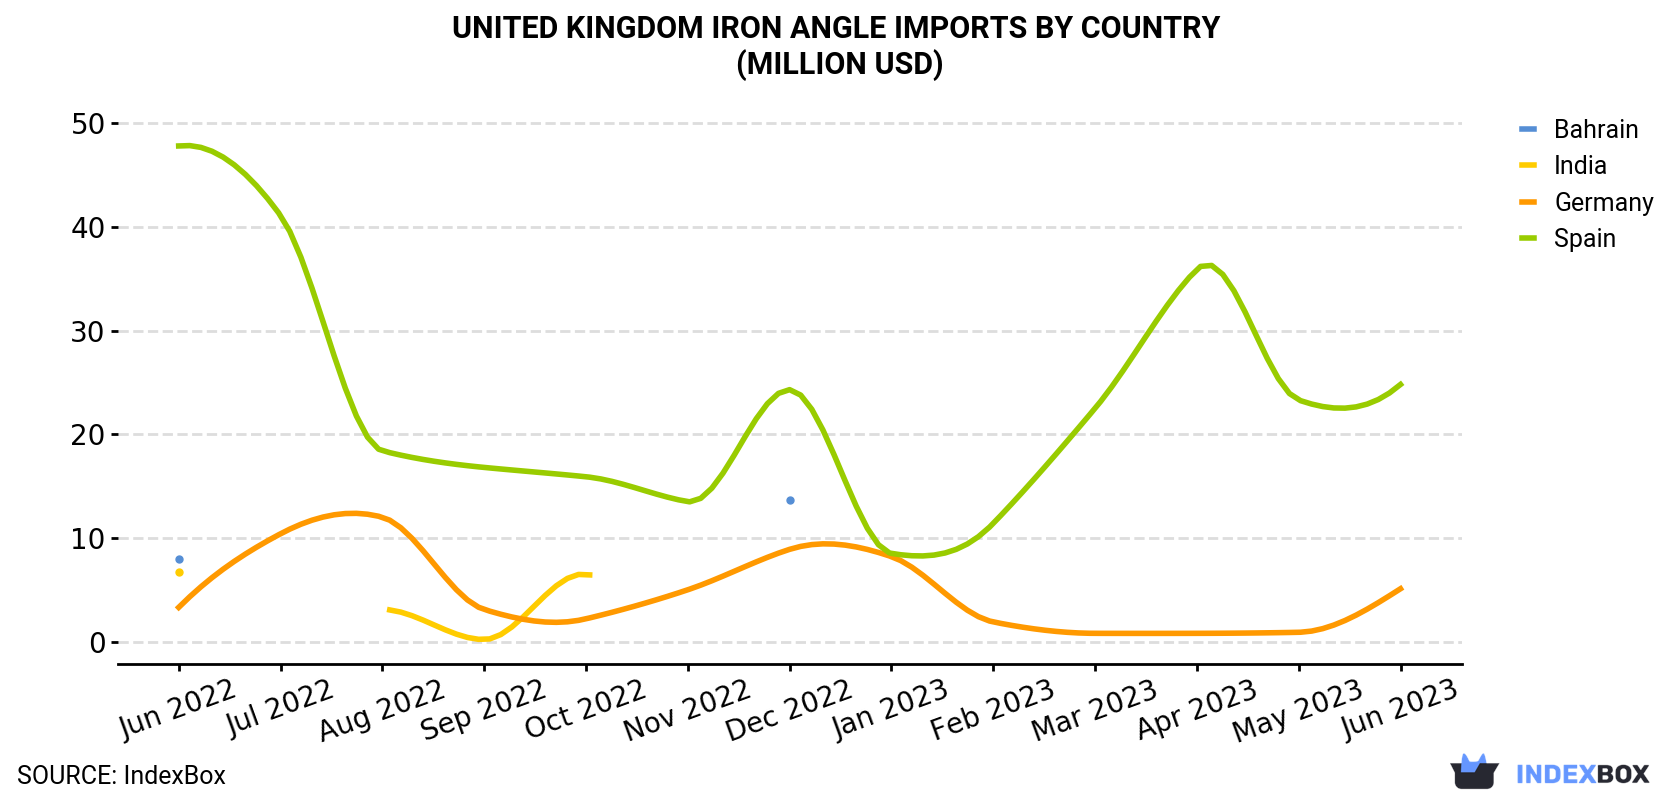 United Kingdom Iron Angle Imports By Country (Million USD)